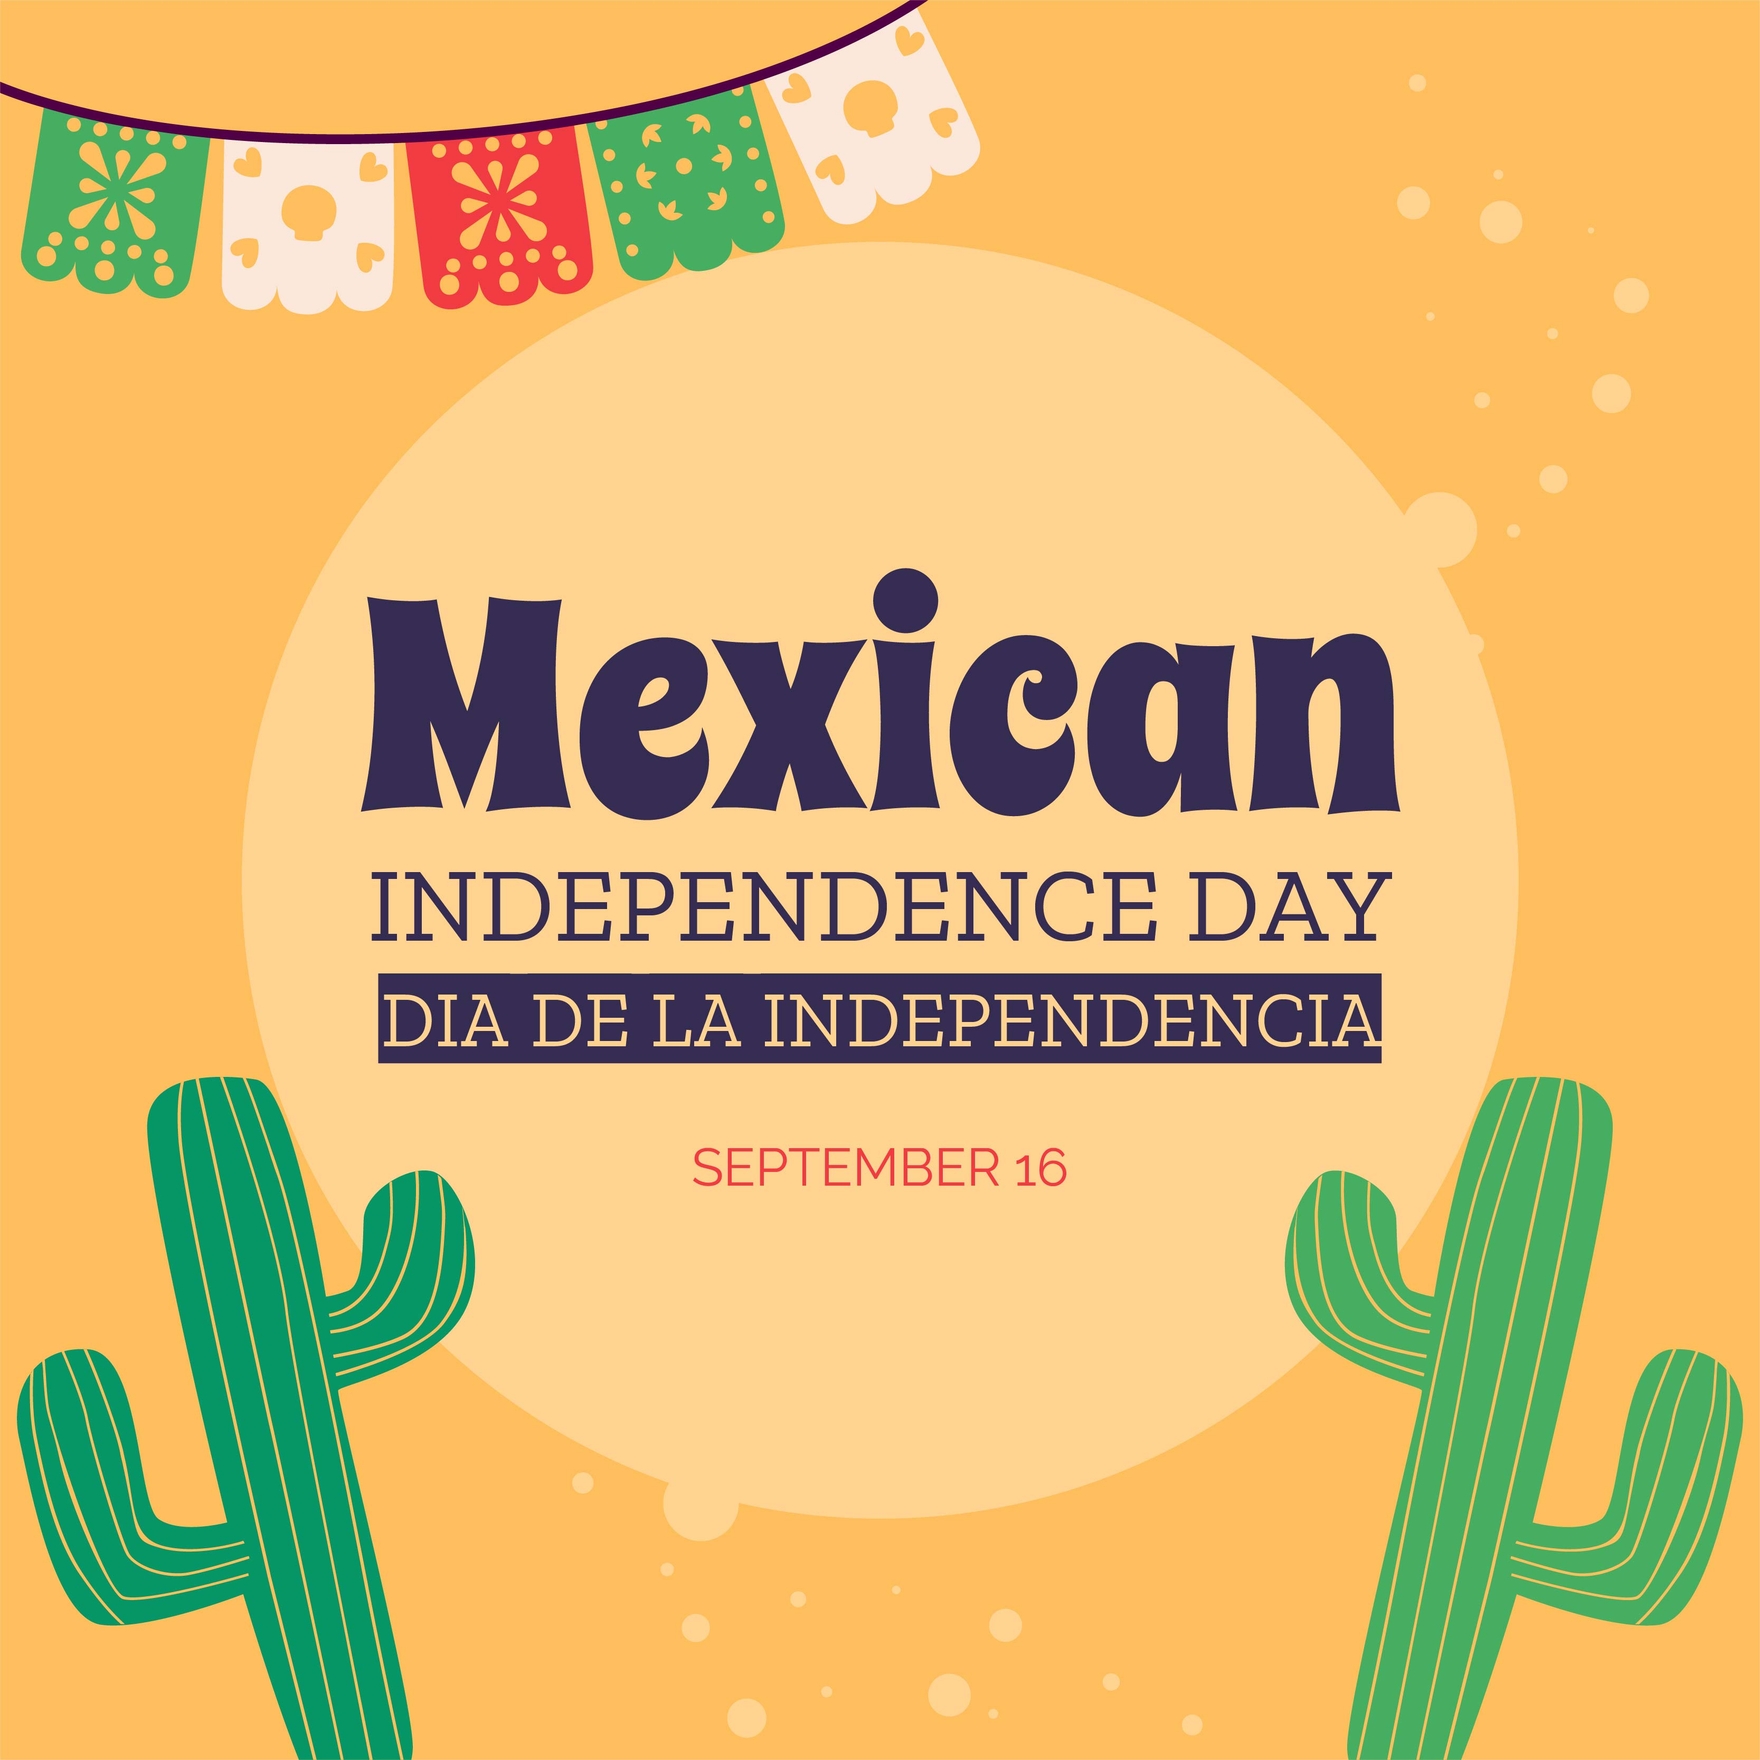 Mexican Independence Day Whats App Post